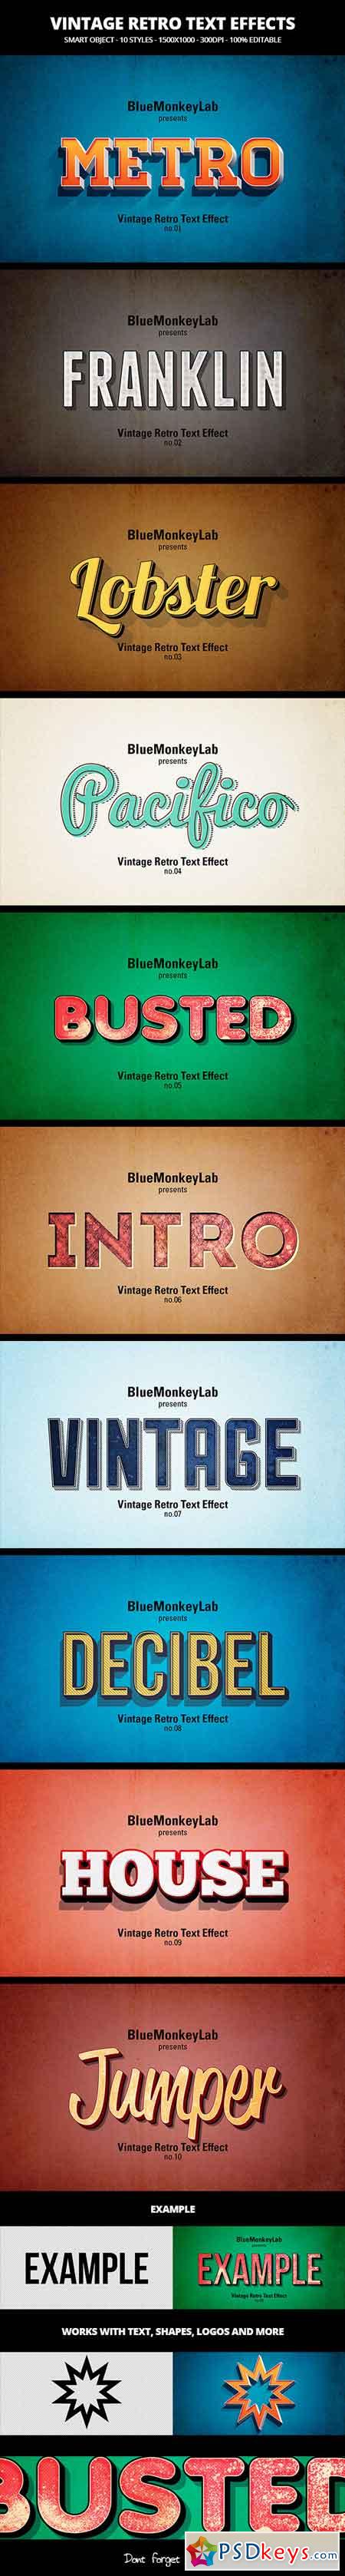 Vintage Retro Text Effects 19623680